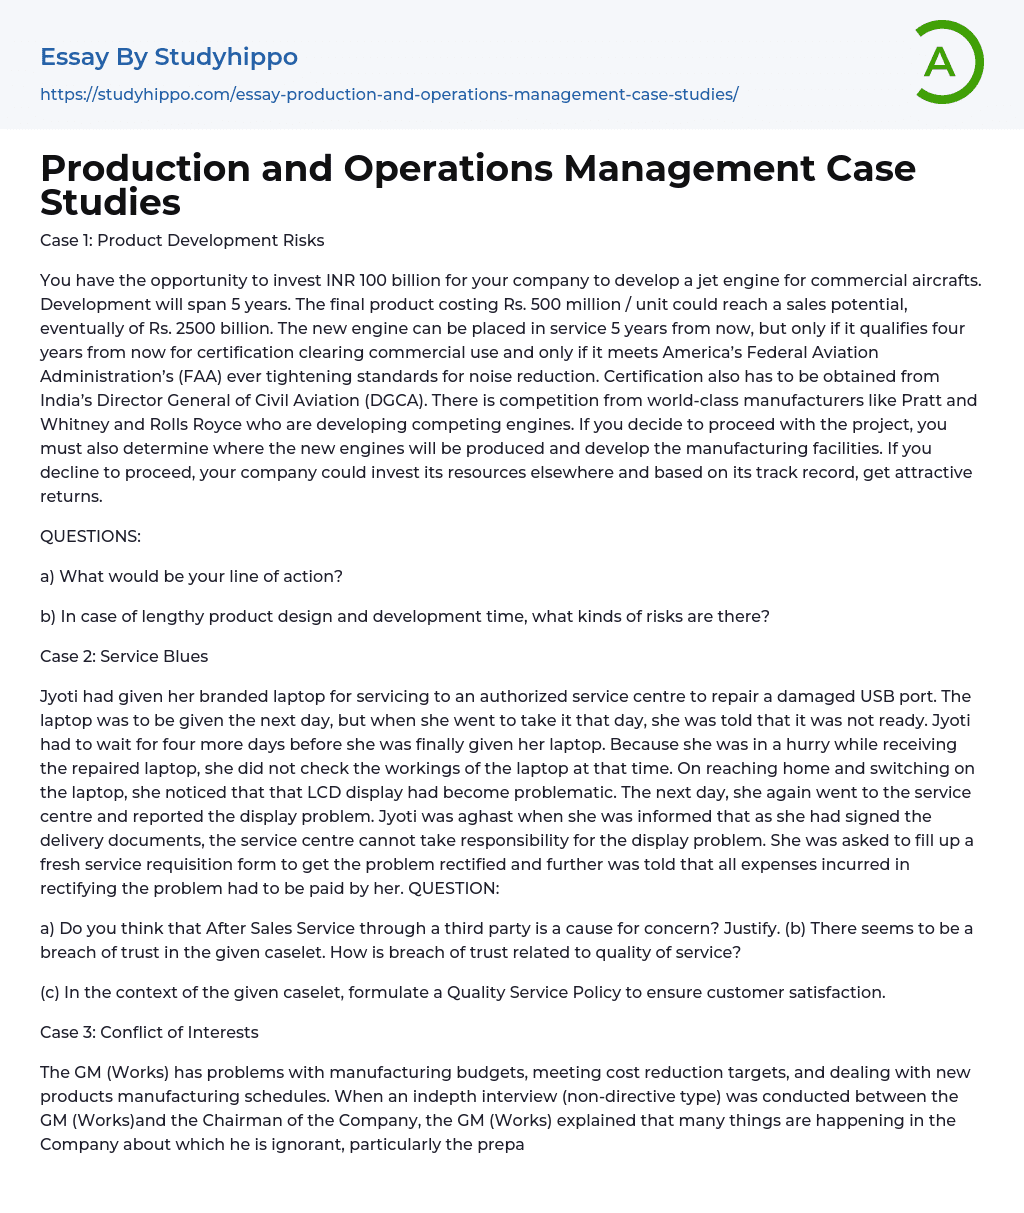 analysis of operations management case study